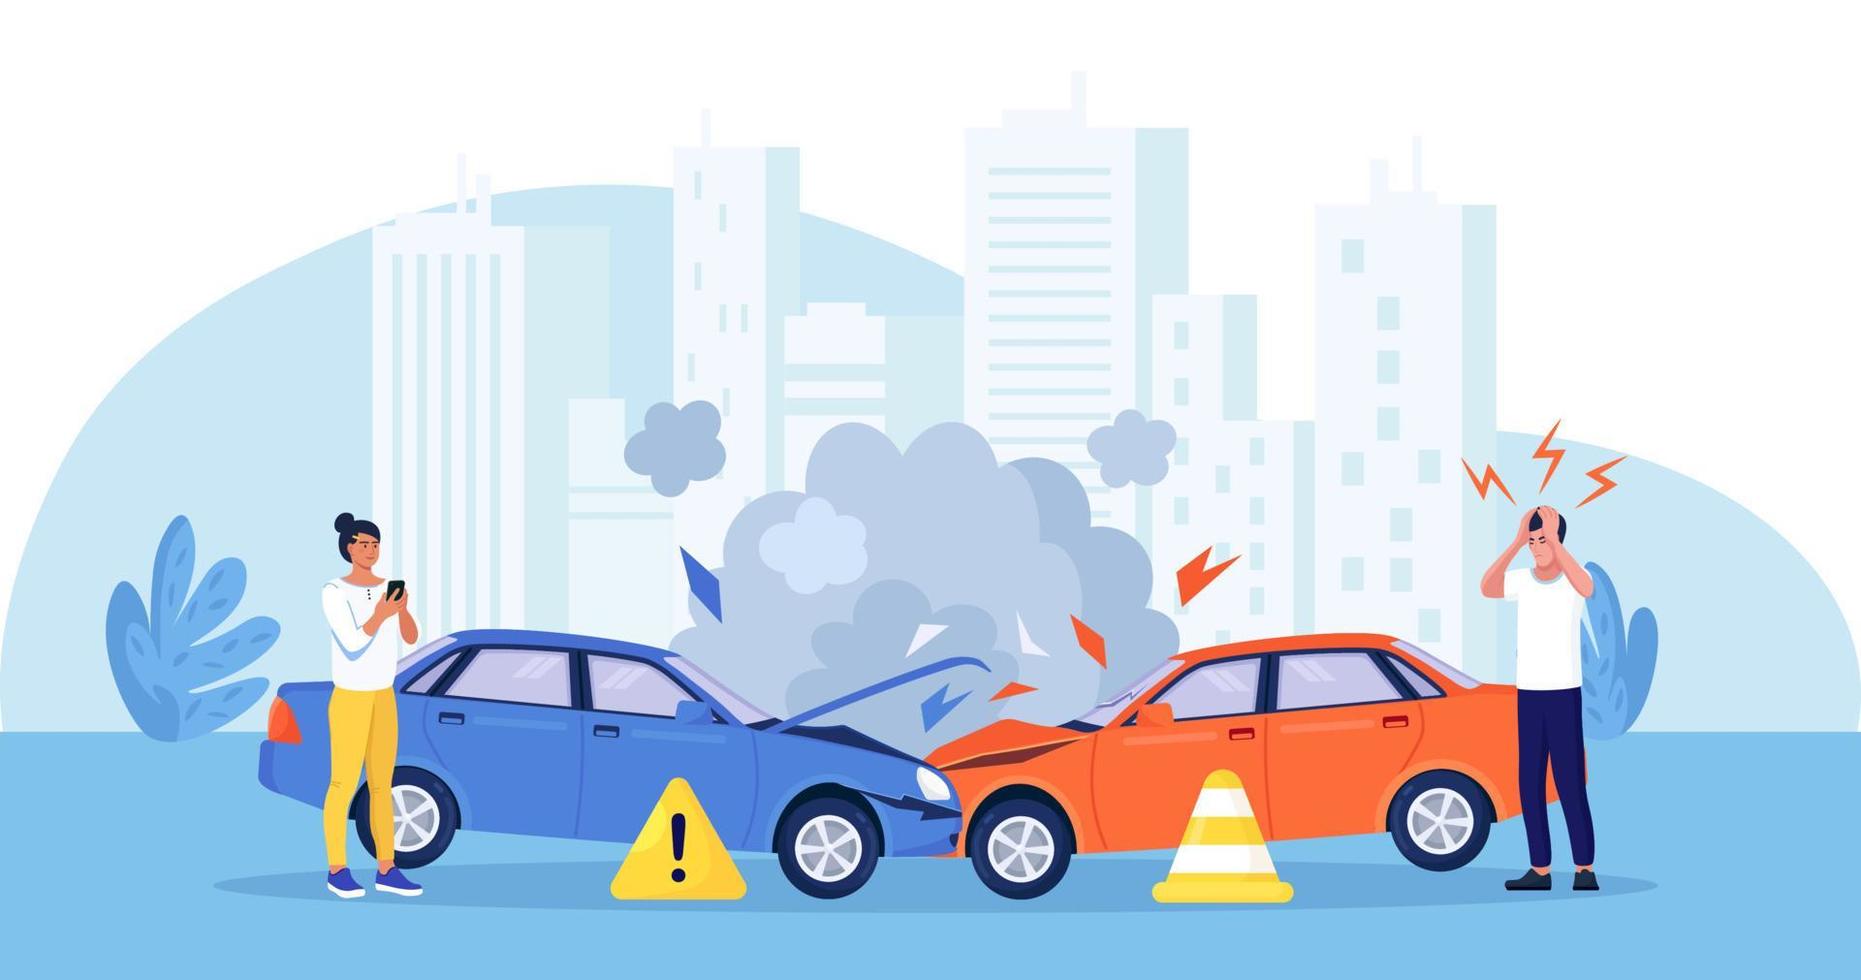 Upset drivers standing near crashed cars. Road traffic accident. Car crash on the road. Vehicle is broken in the city. Smashed auto on highway. Collision of vehicles, wreck. Automobile damaged vector